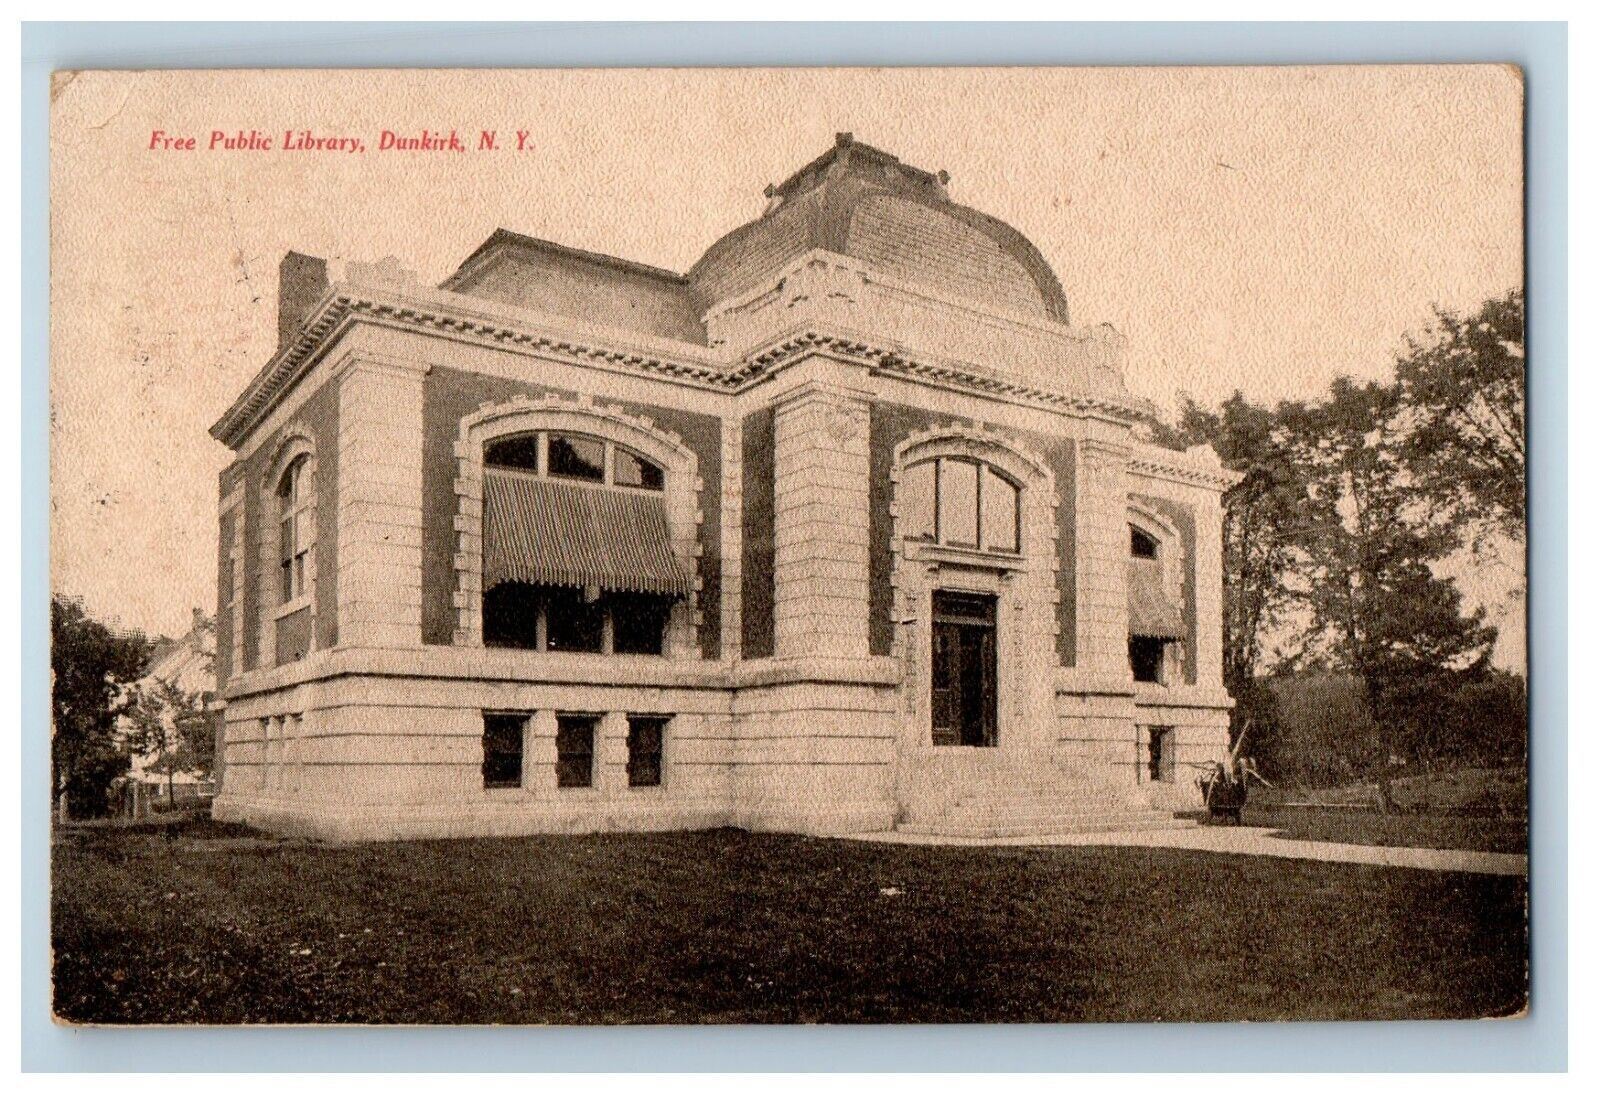 1910 Free Public Library Building Dunkirk New York NY Posted Antique Postcard